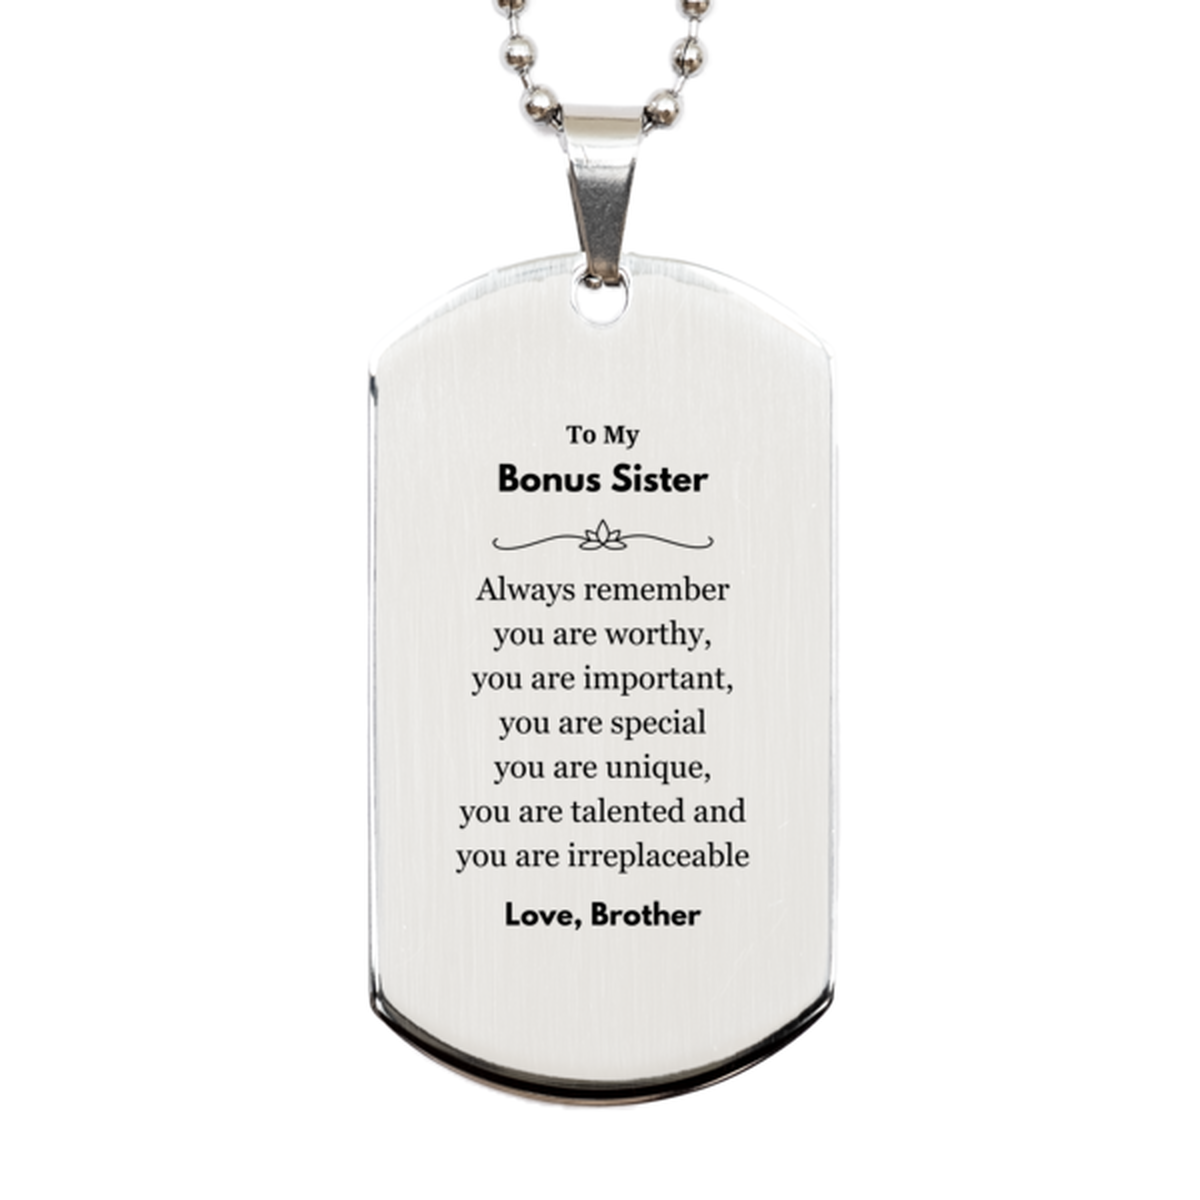 Bonus Sister Birthday Gifts from Brother, Inspirational Silver Dog Tag for Bonus Sister Christmas Graduation Gifts for Bonus Sister Always remember you are worthy, you are important. Love, Brother